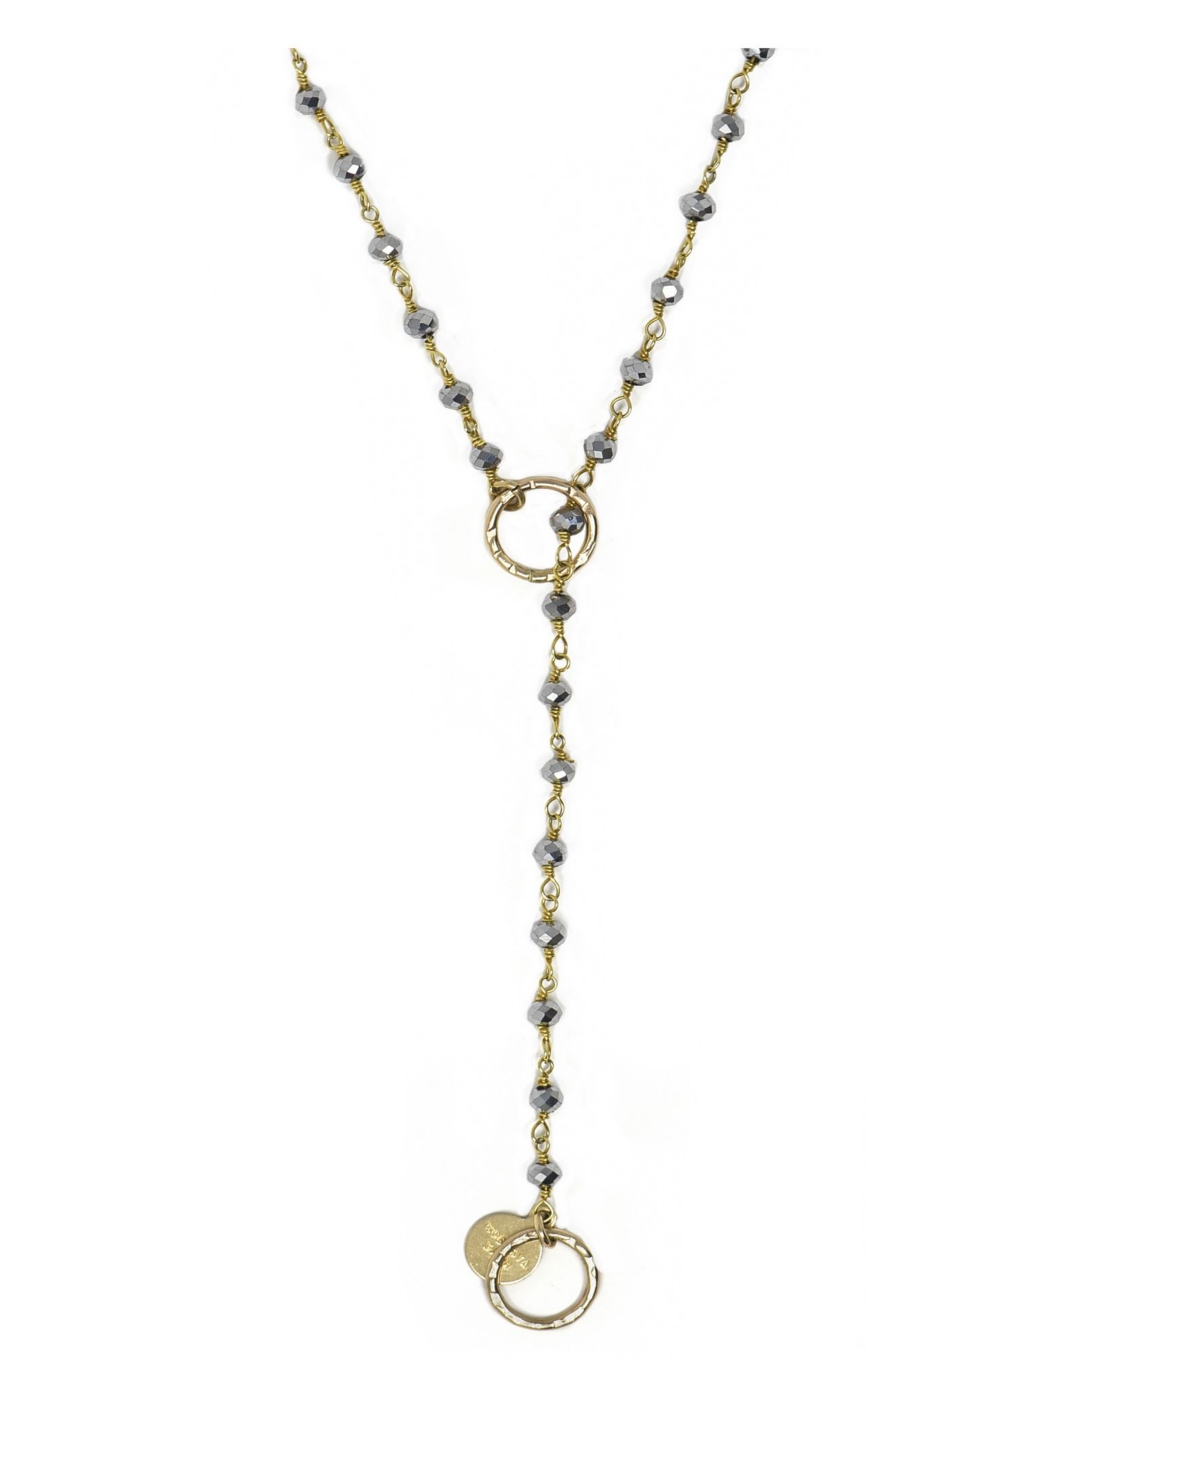 14k Gold Filled Stones Handwrapped Single Delight Necklace - White Pearl